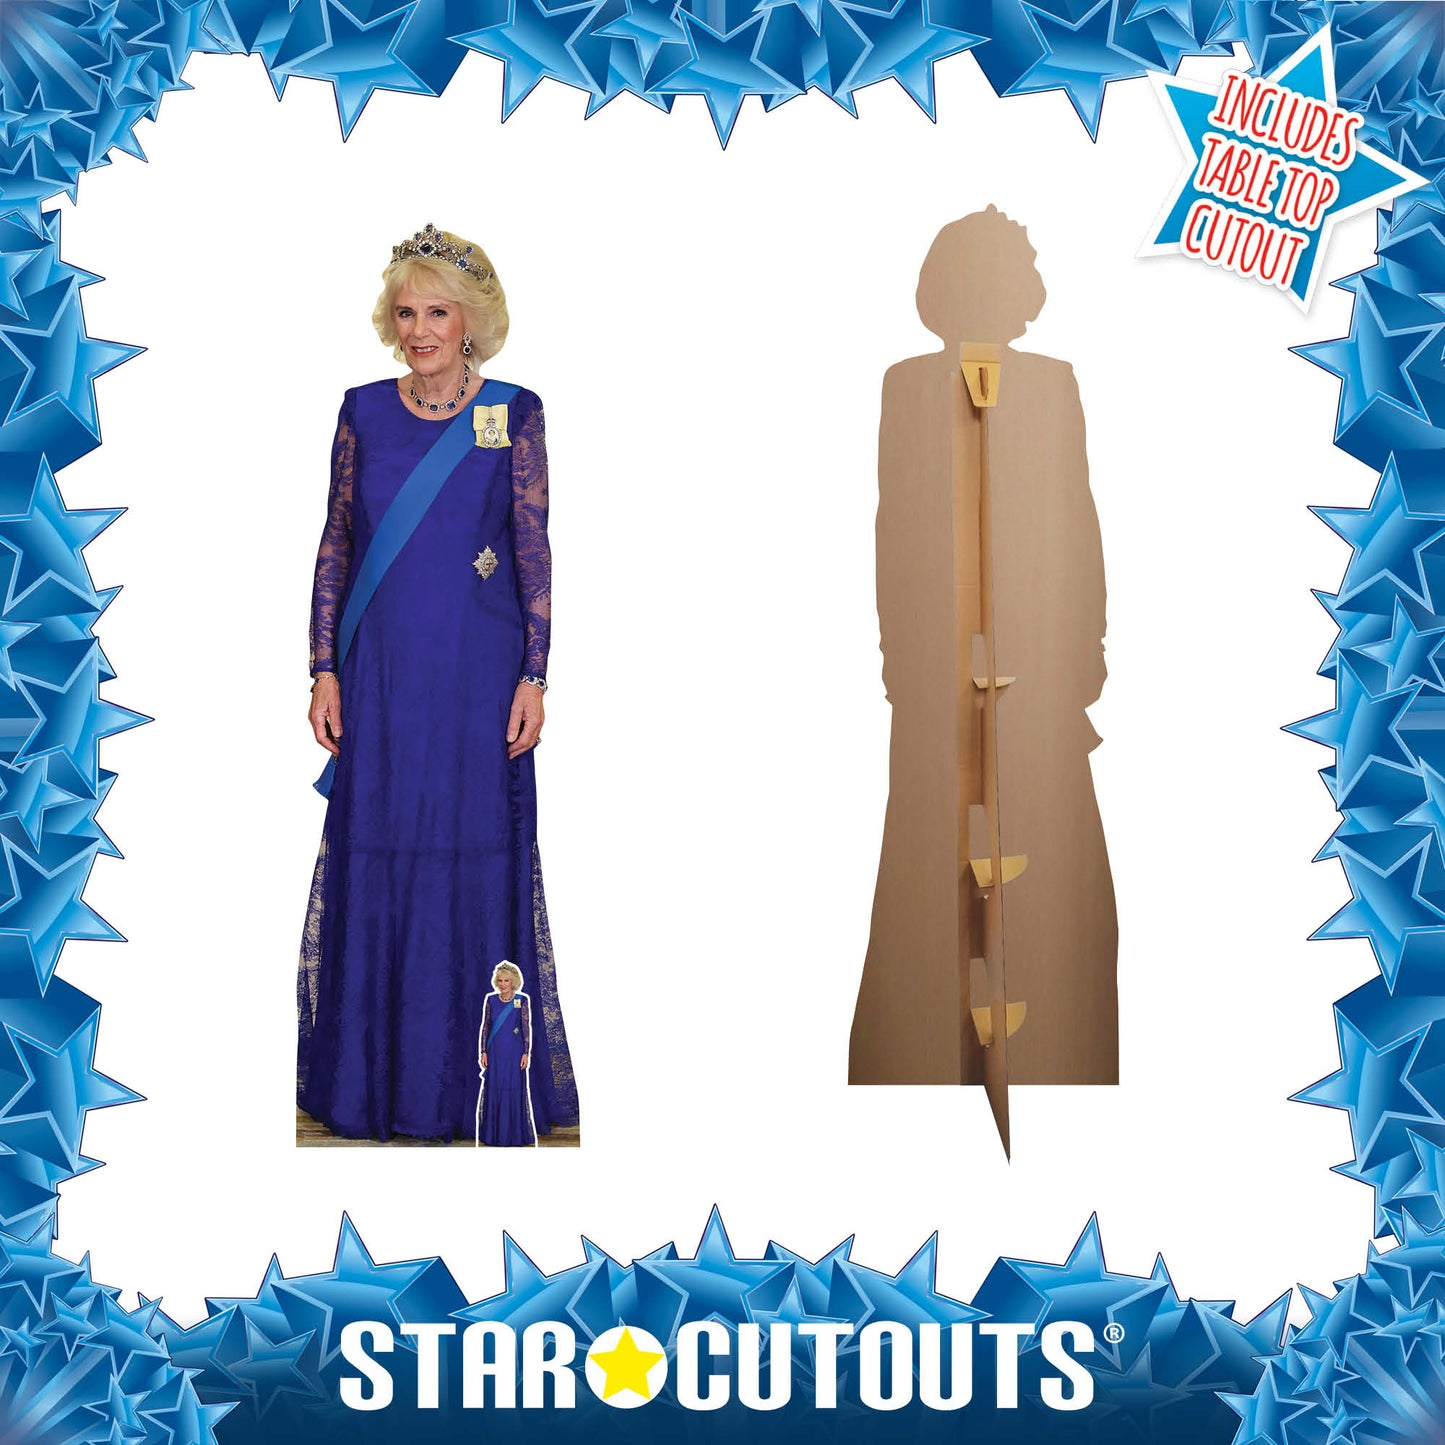 Camilla The Queen Consort with Crown Cardboard Cutout